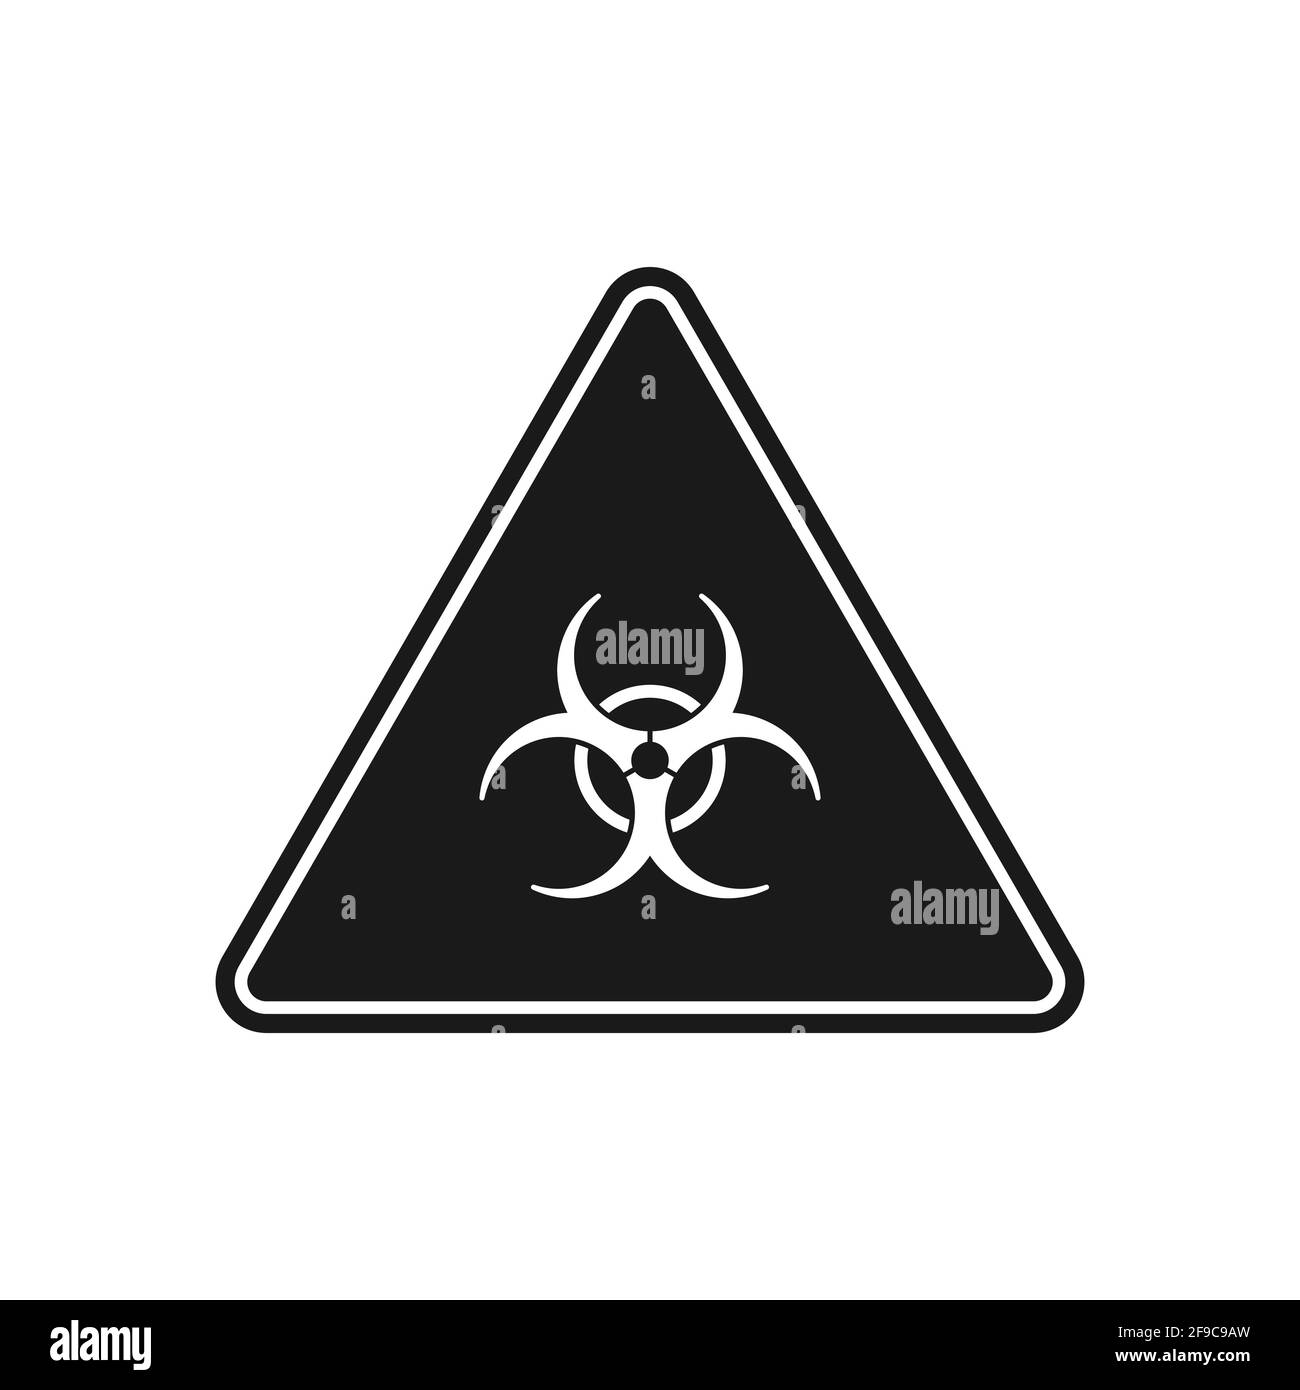 The triangular black icon of a biohazard sign is isolated on a white background. Stock Vector